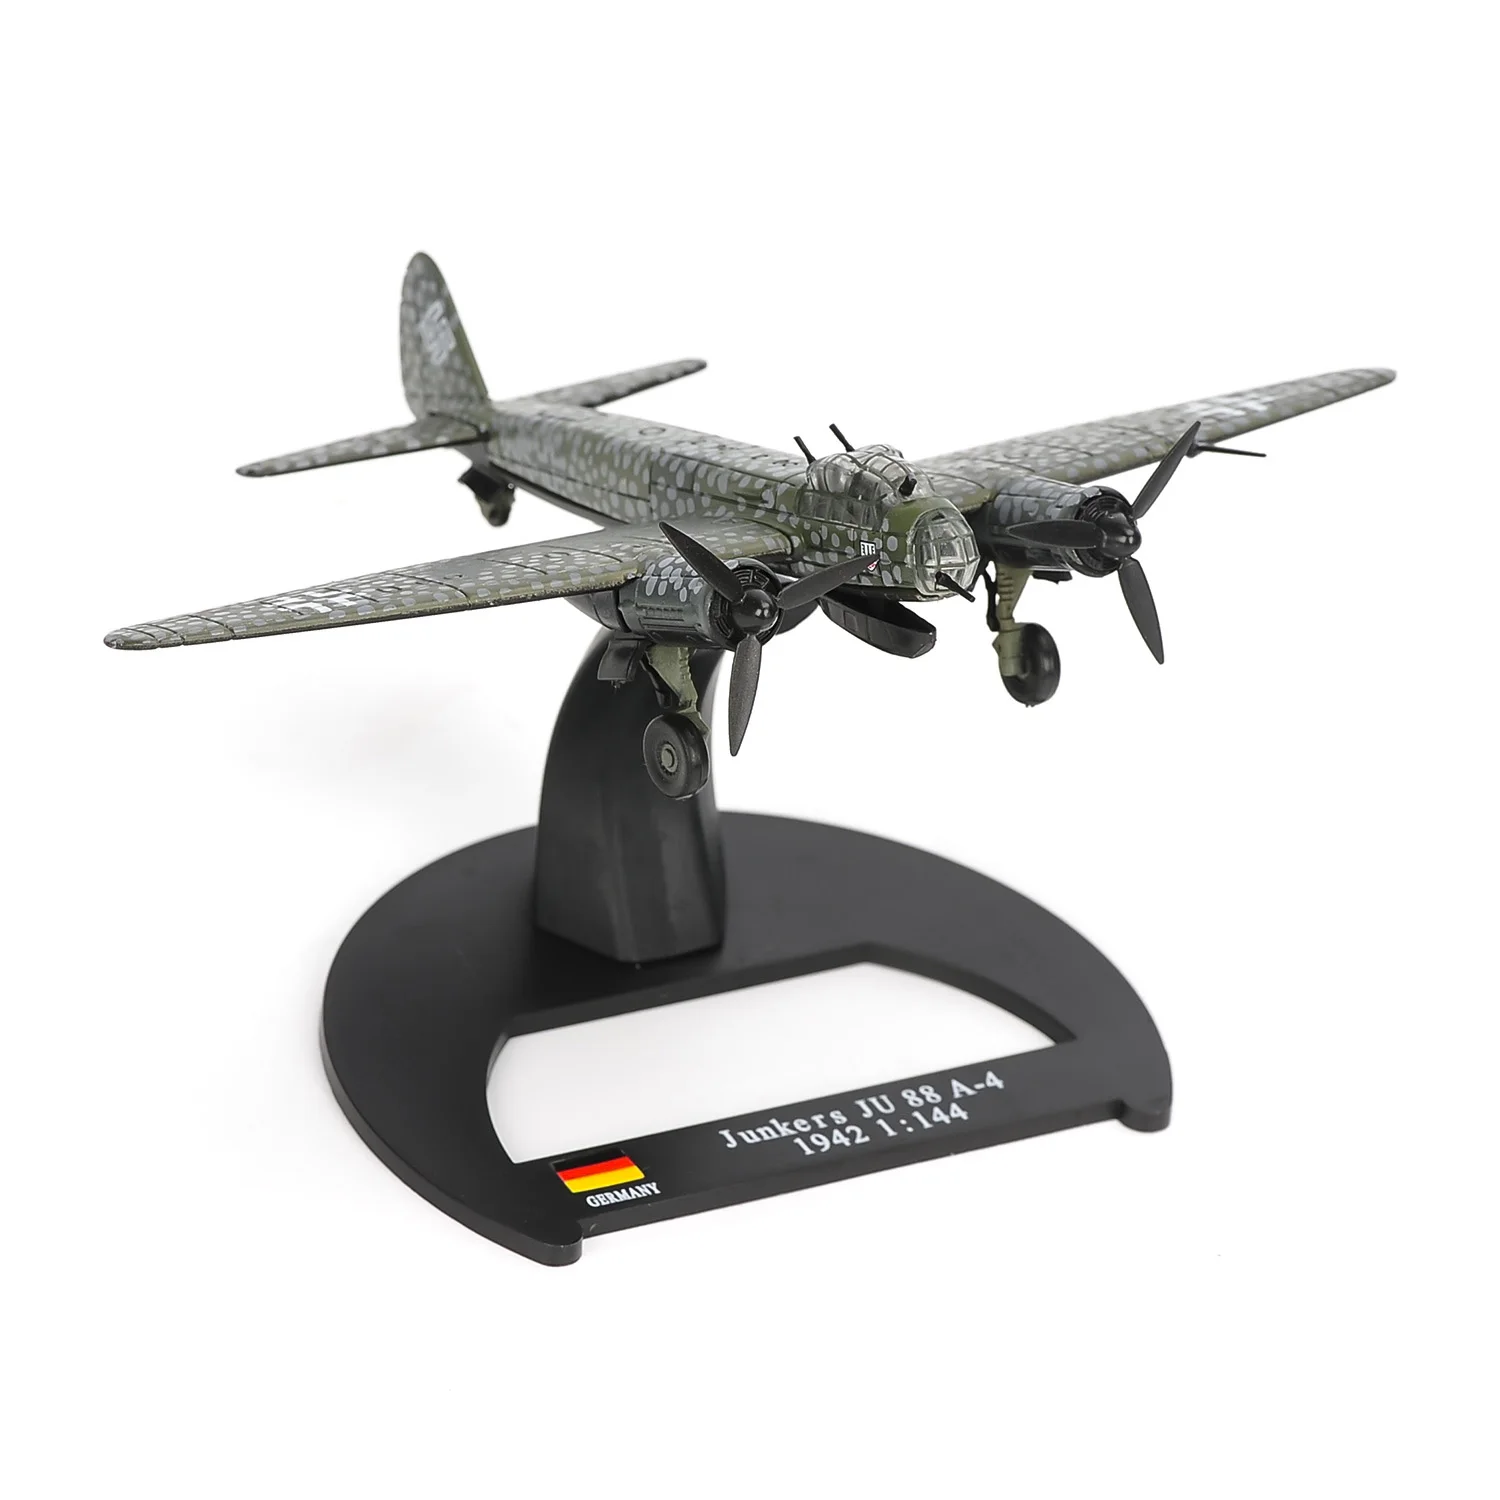 

1/144 Scale WWII Luftwaffe JU88A4 Bombing Plane Diecast Metal Aircraft Model For Collection Children Airplane Toy